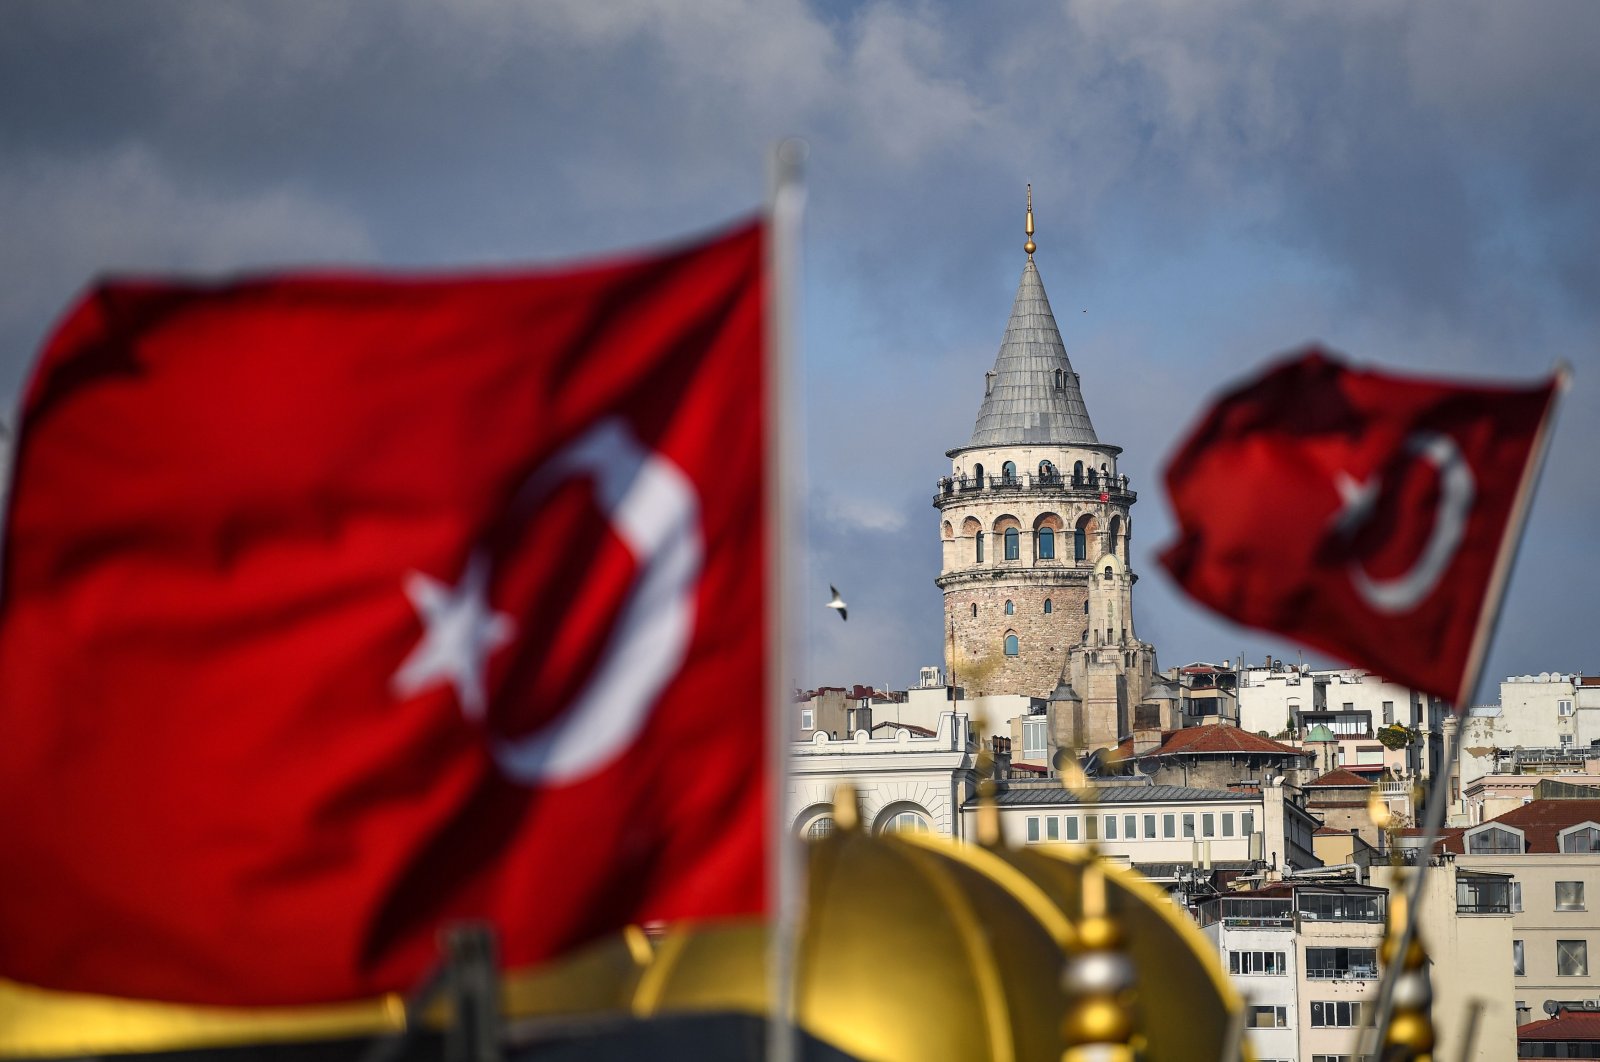 The iconic Galata Tower is pictured next to Turkish national flags during a weekend curfew aimed at curbing the spread of the COVID-19 pandemic, Istanbul, Turkey, DeC. 6, 2020.